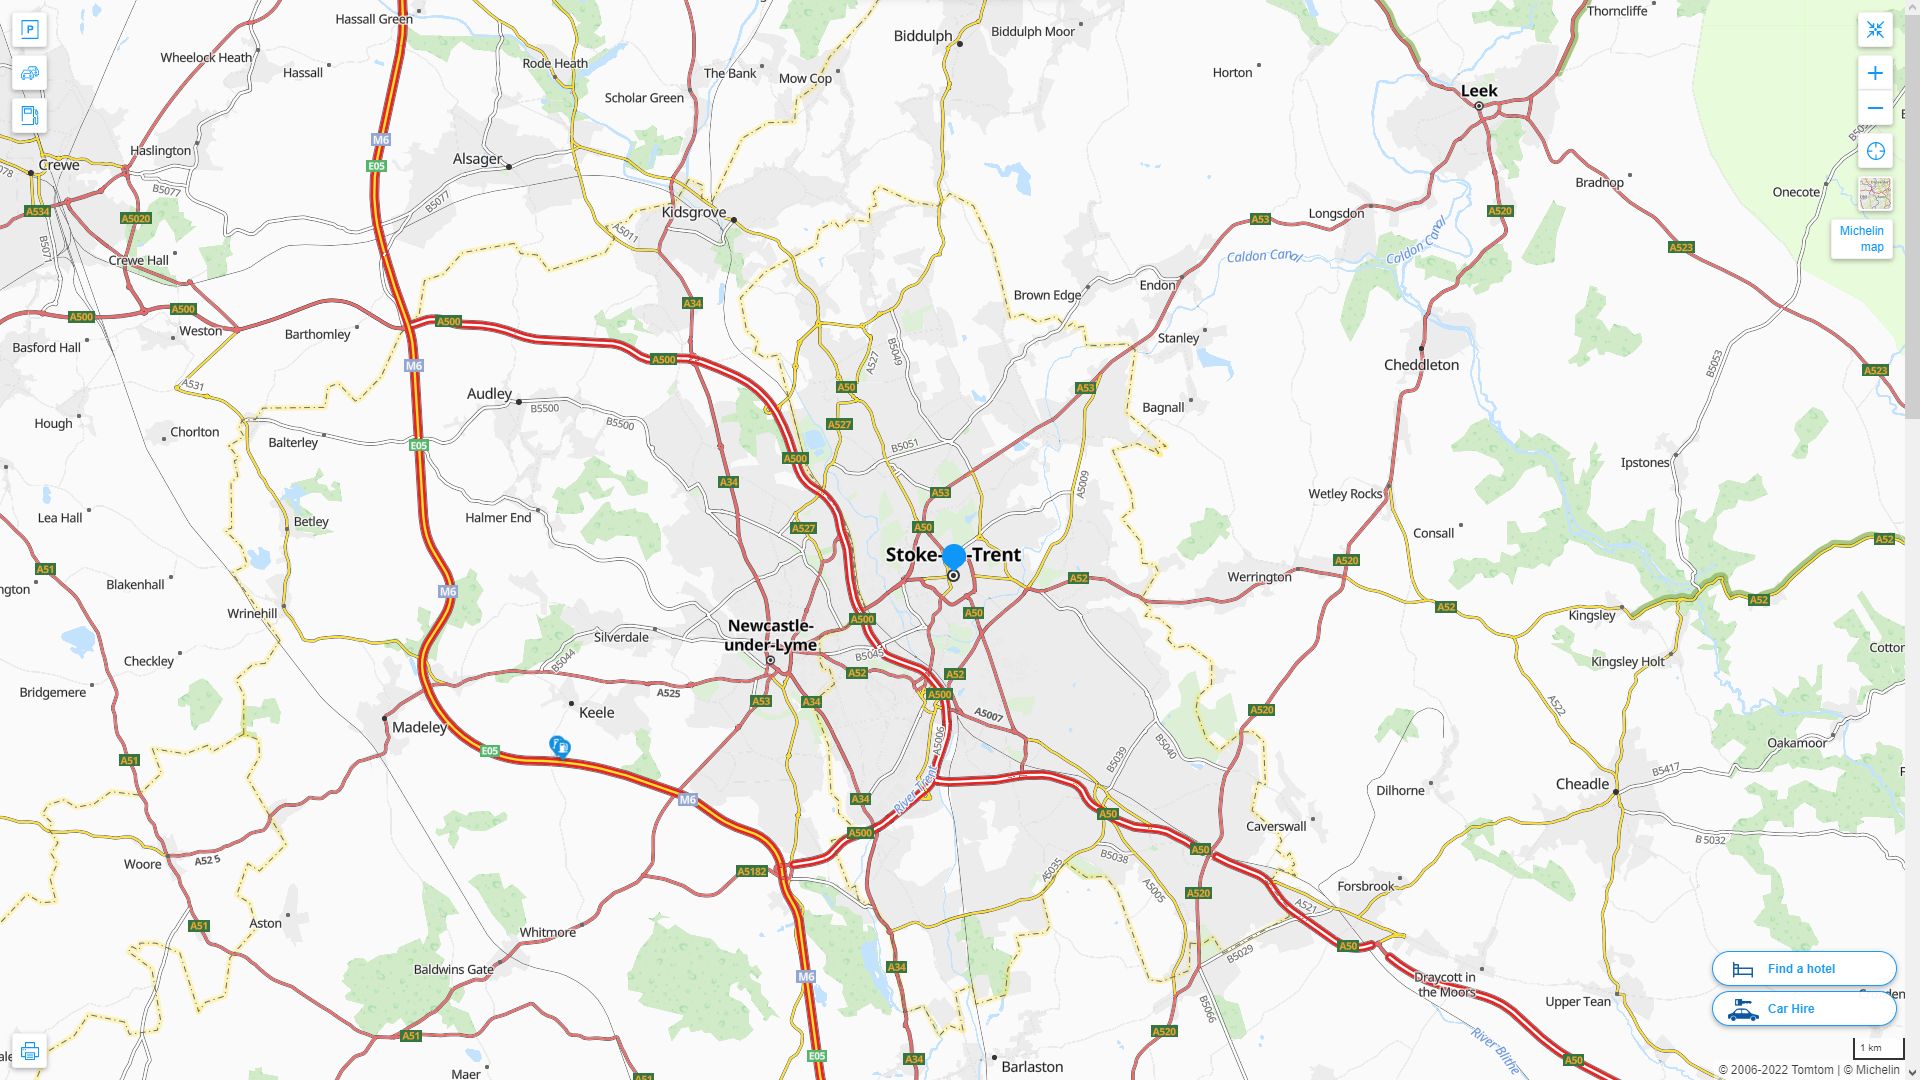 Stoke on Trent Highway and Road Map